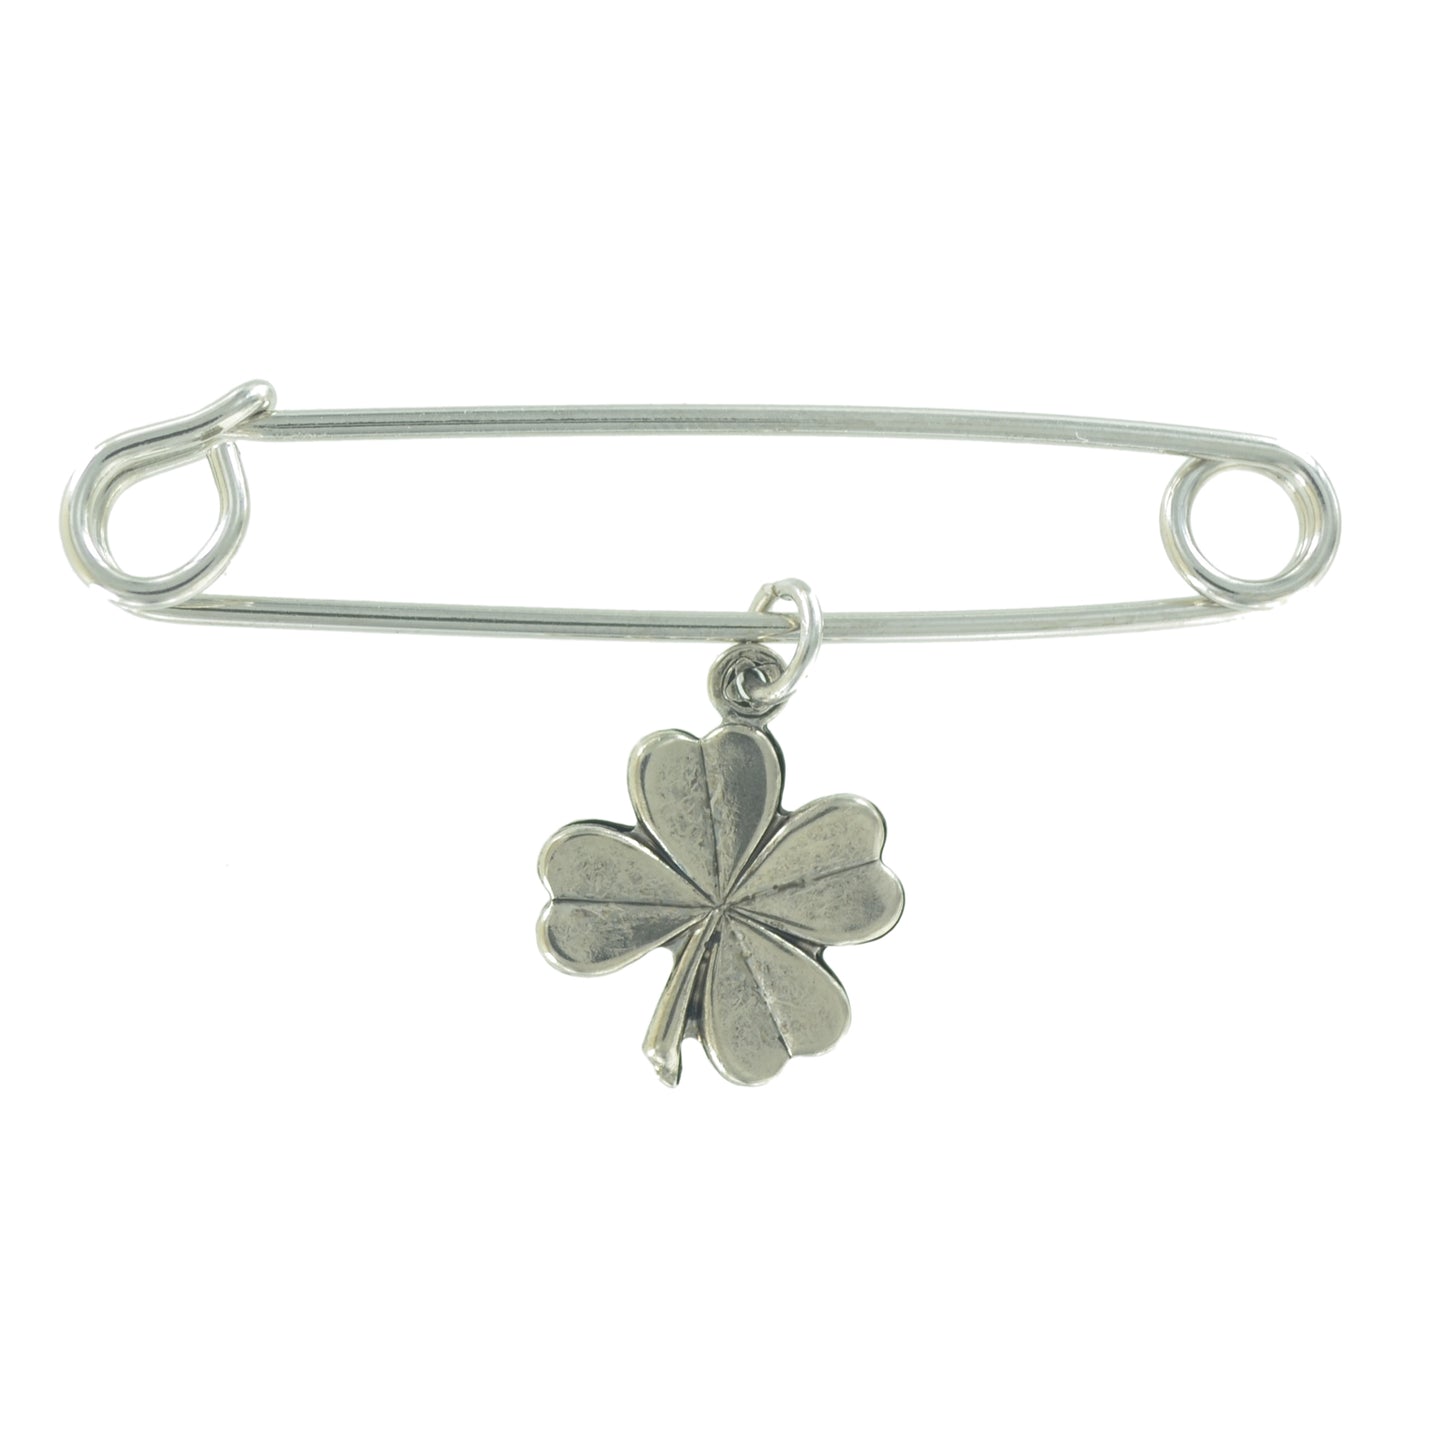 Made in USA Safety Pin Brooch Four Leaf Clover Luck Charm Silver Tone  2"